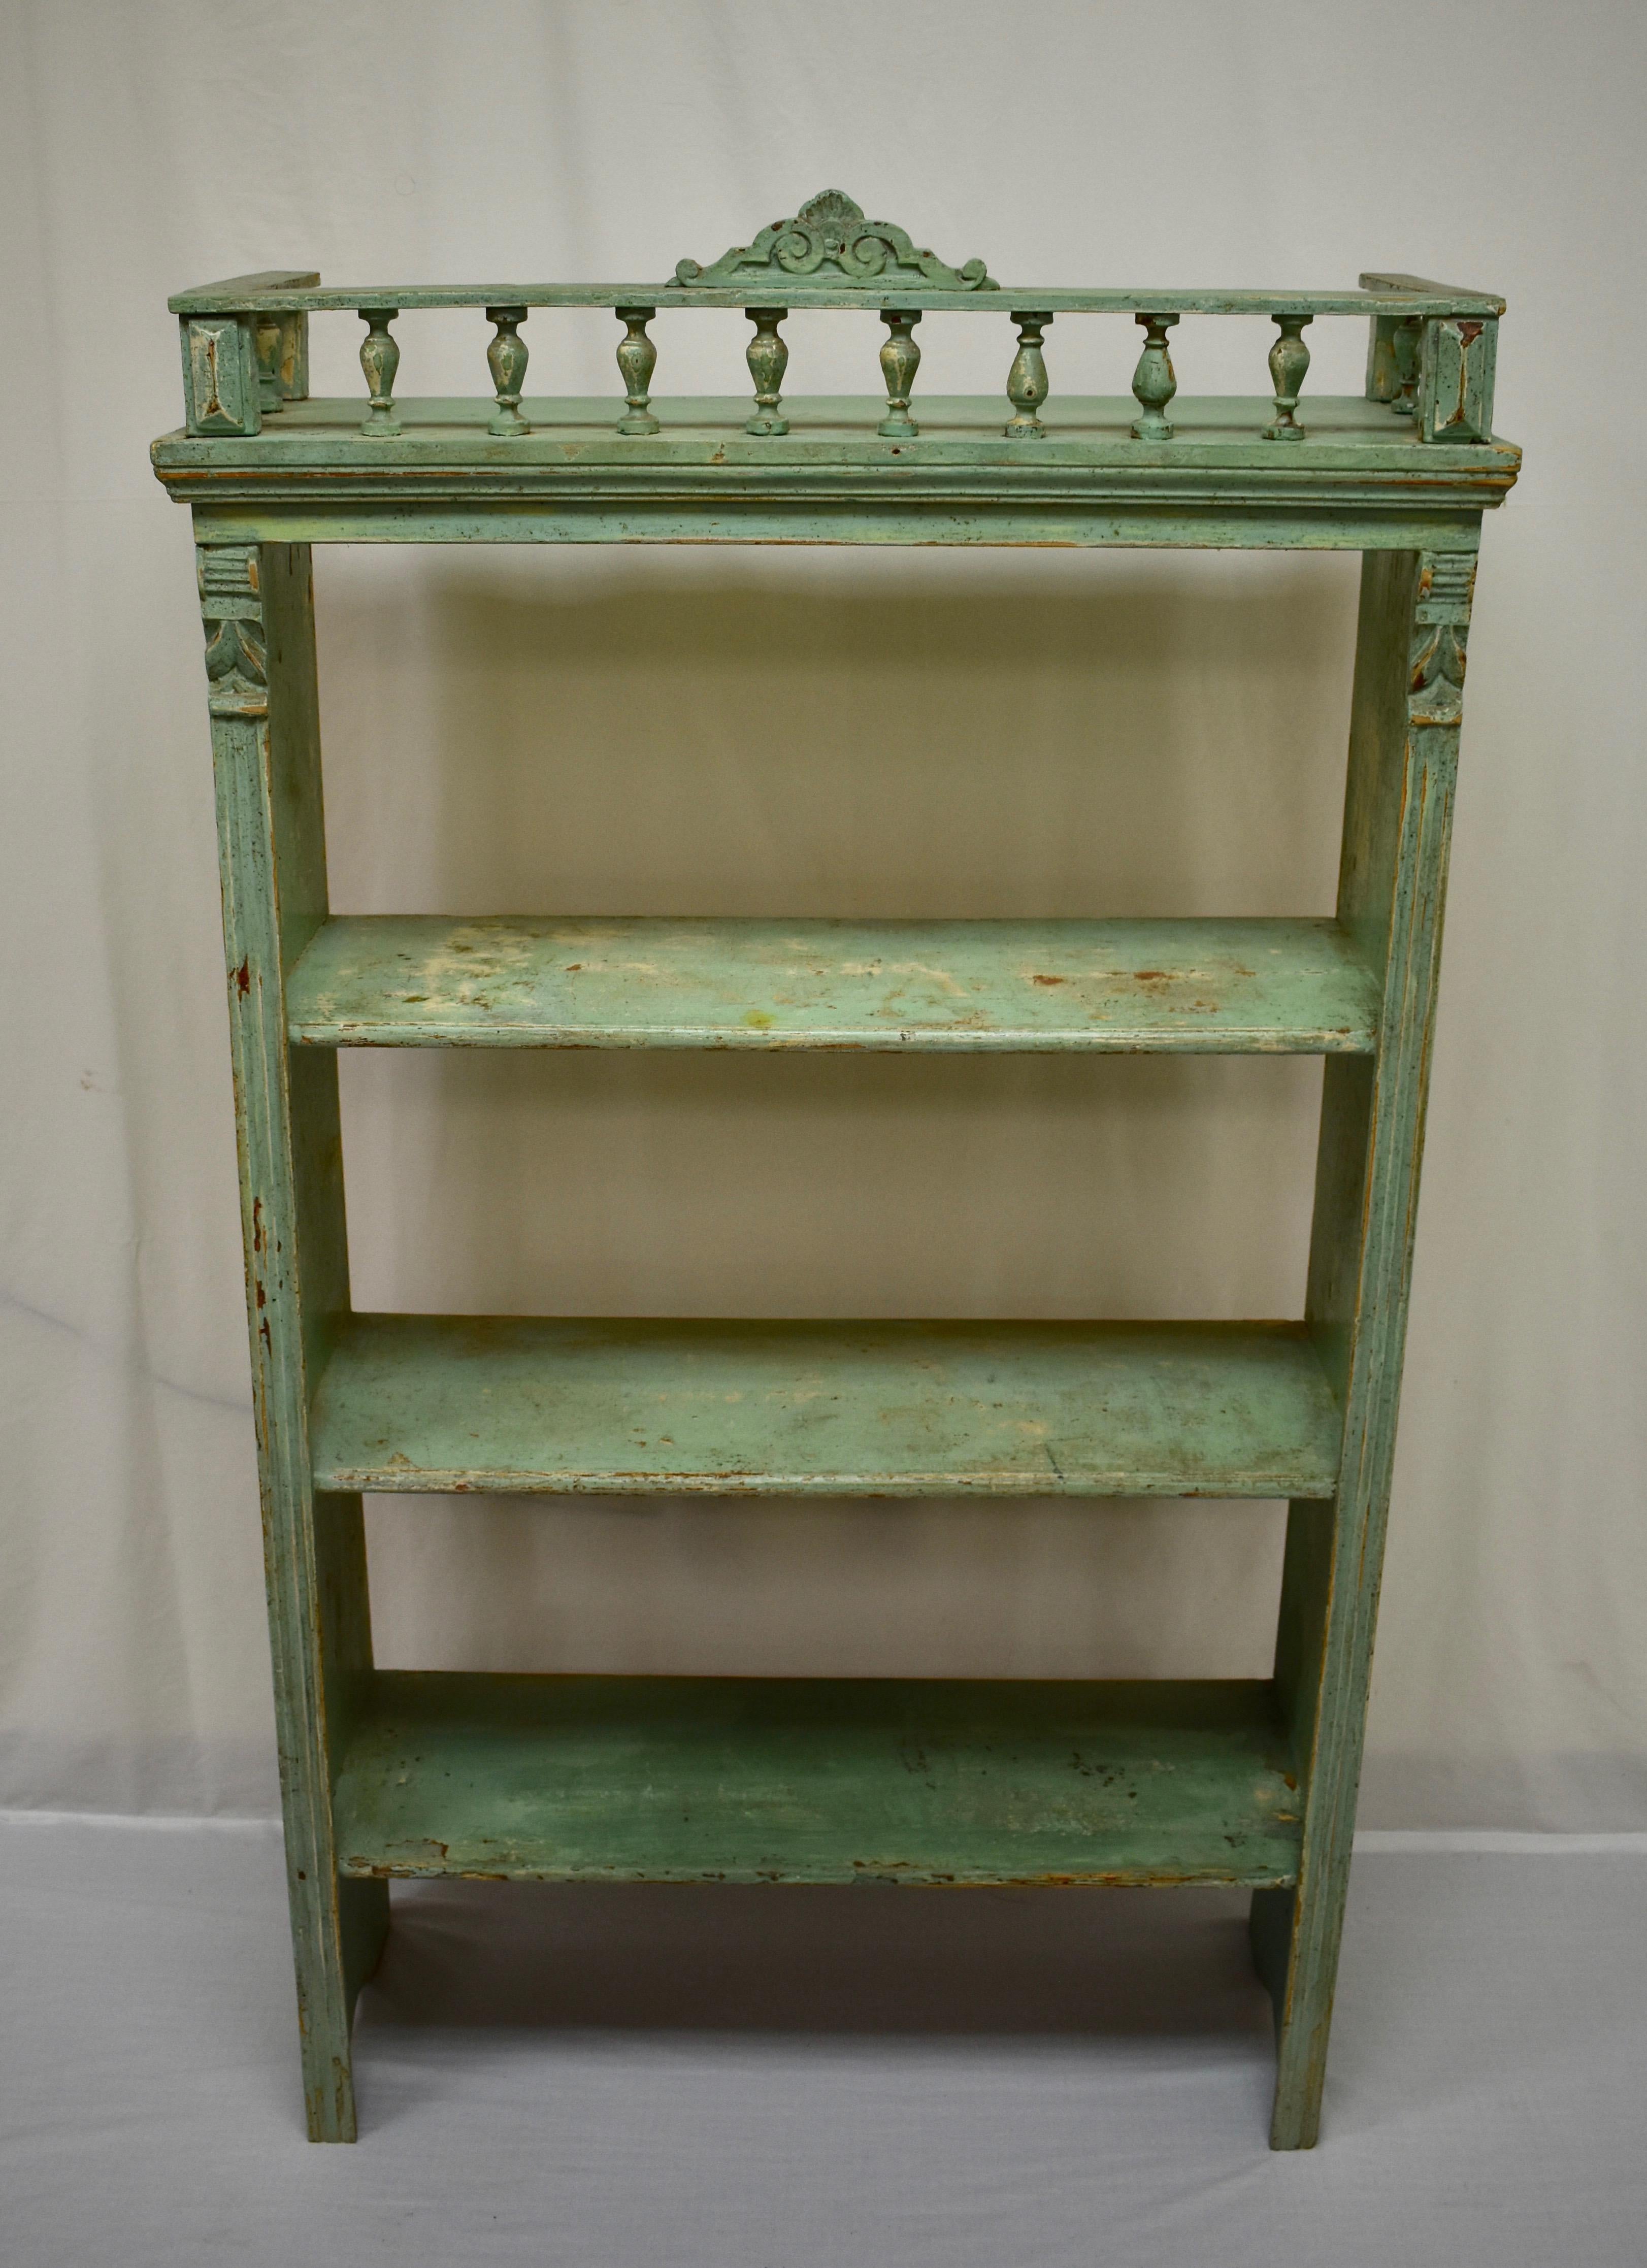 This Primitive utility shelf unit has been used for storing heavy vessels and some of them have left their marks on the shelves of this pretty piece. Three shelves are pegged into the uprights which are decorated with fluting and acanthus leaf